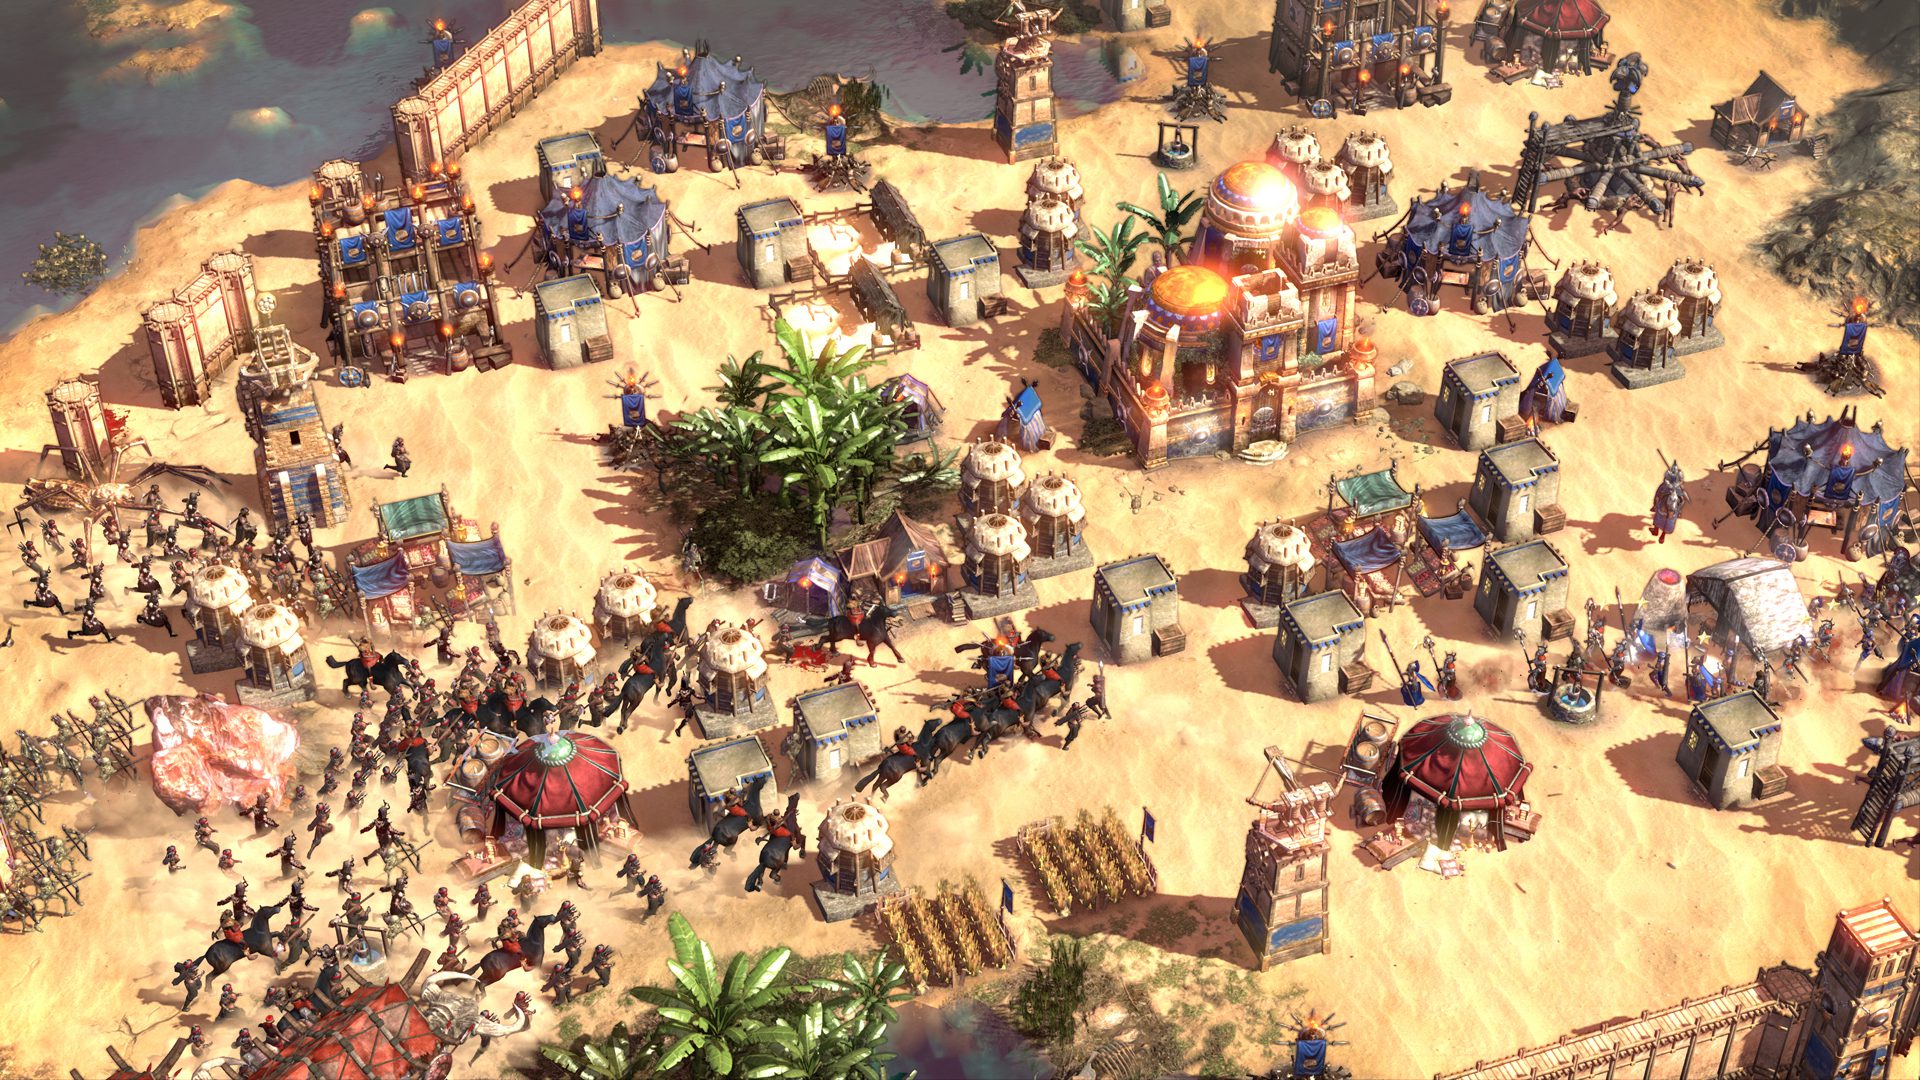 Conan Unconquered shows off co-op gameplay